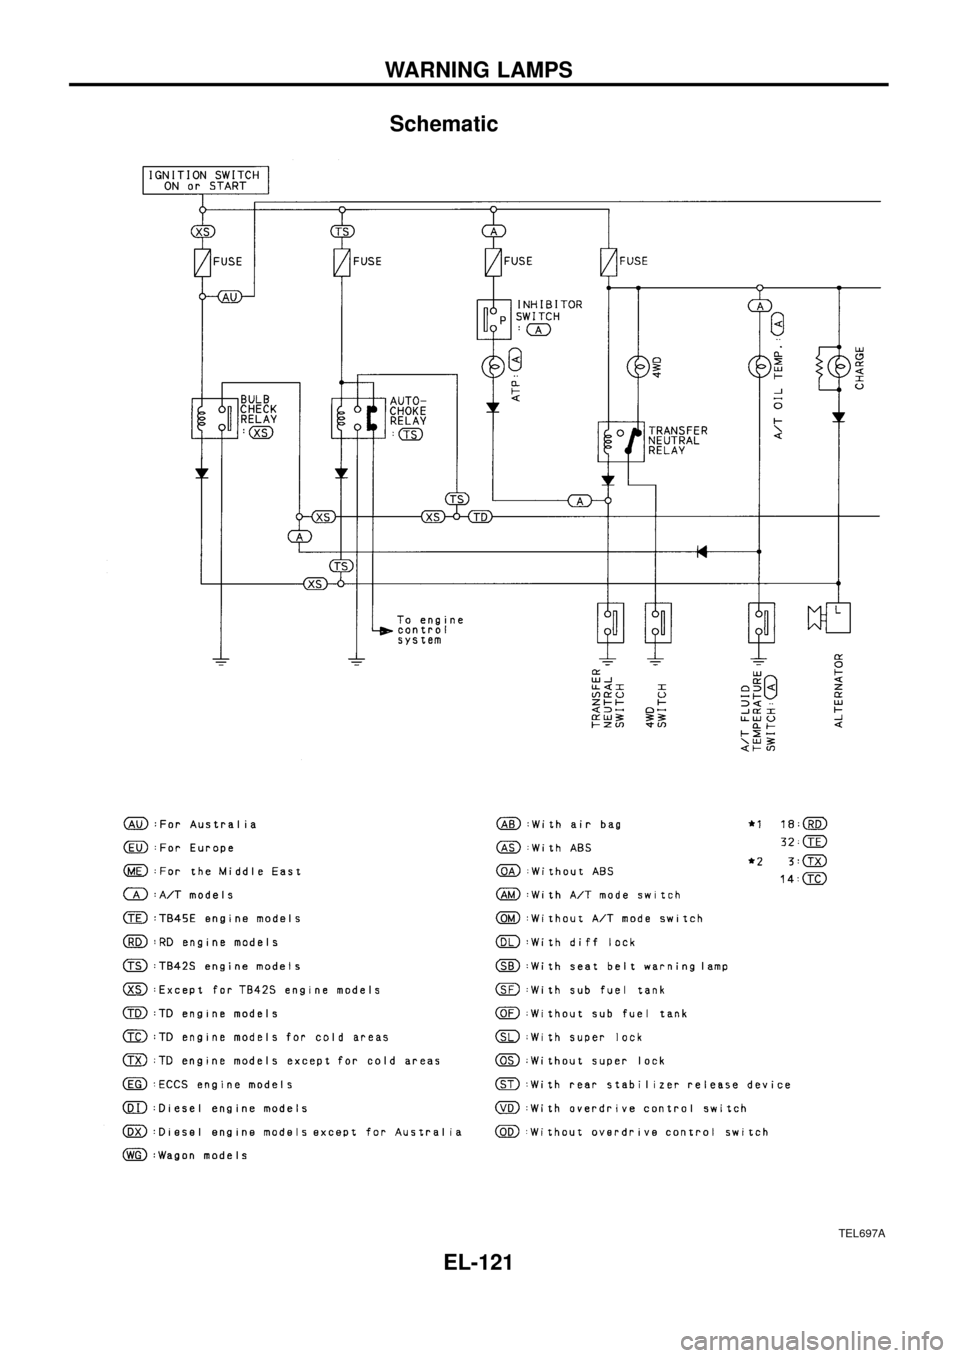 NISSAN PATROL 1998 Y61 / 5.G Electrical System User Guide Schematic
TEL697A
WARNING LAMPS
EL-121 